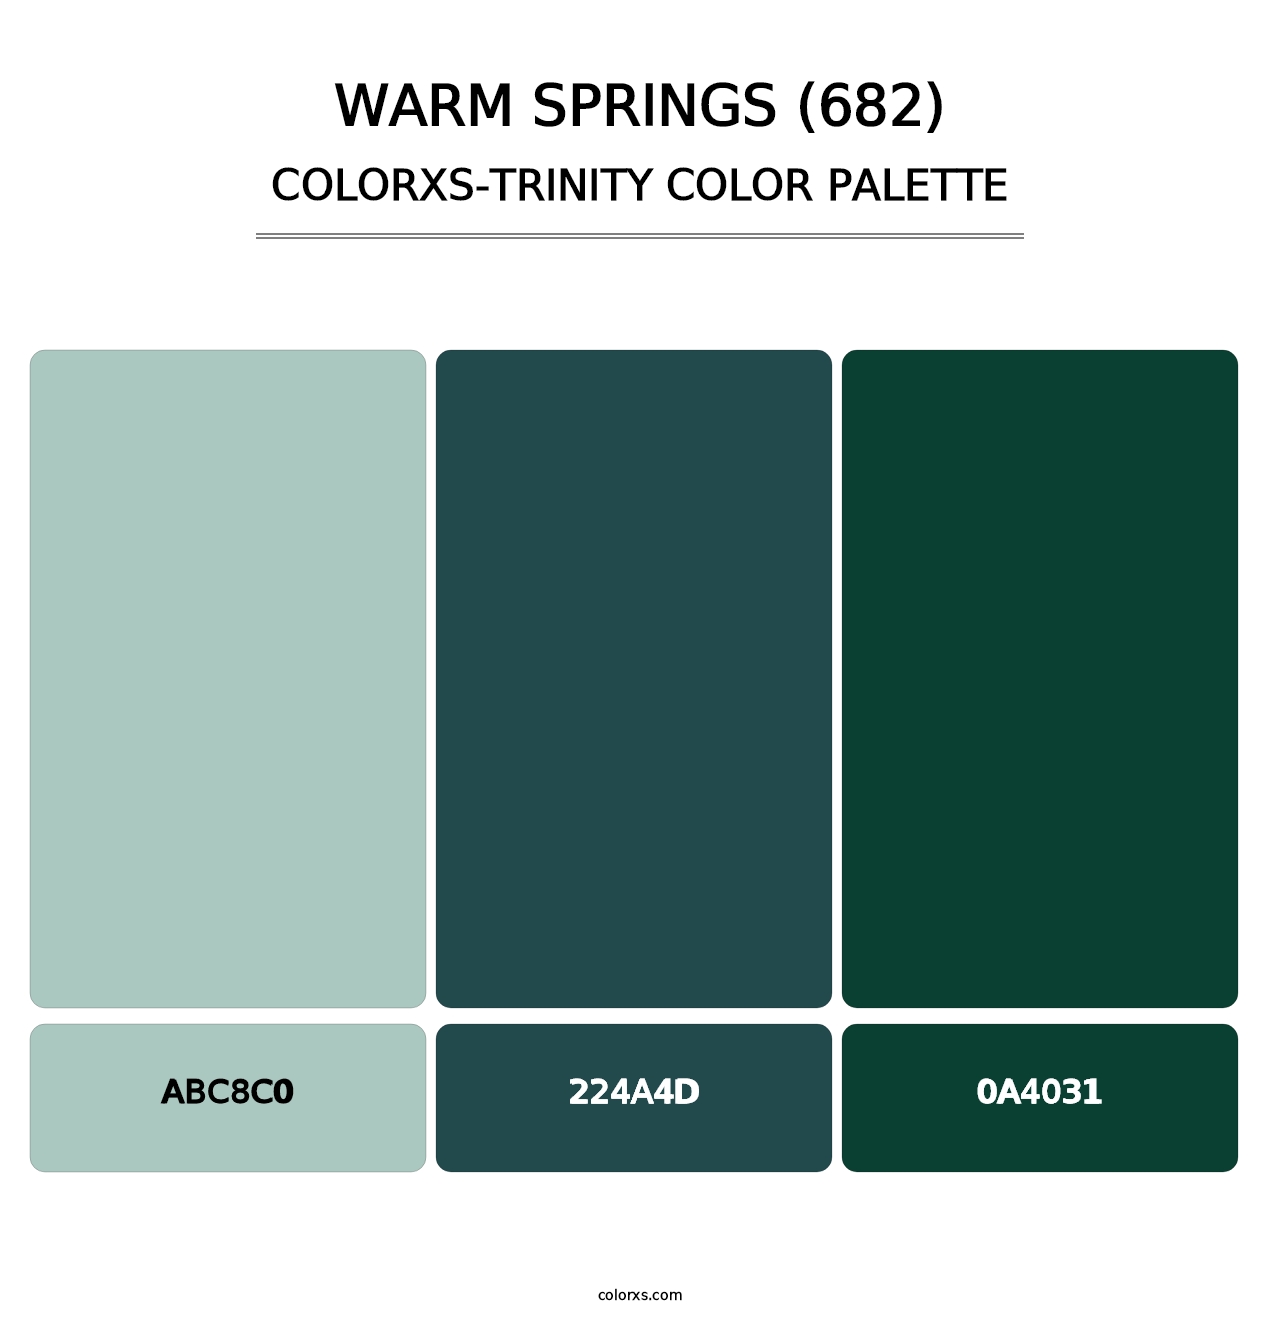 Warm Springs (682) - Colorxs Trinity Palette